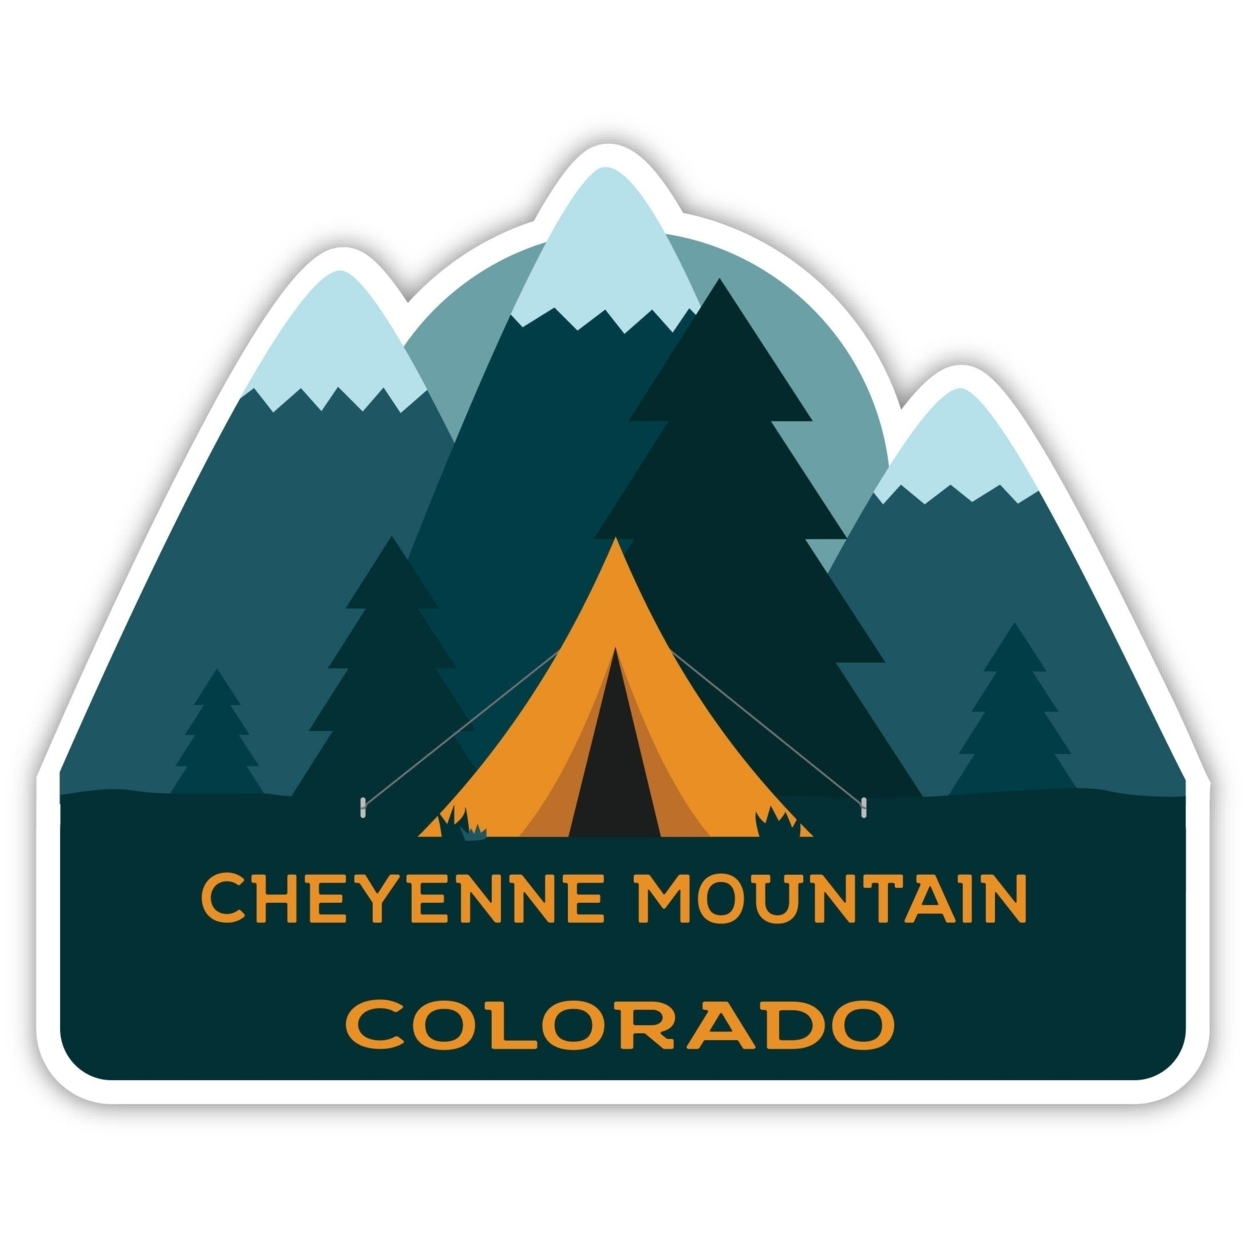 Cheyenne Mountain Colorado Souvenir Decorative Stickers (Choose Theme And Size) - 4-Pack, 2-Inch, Tent